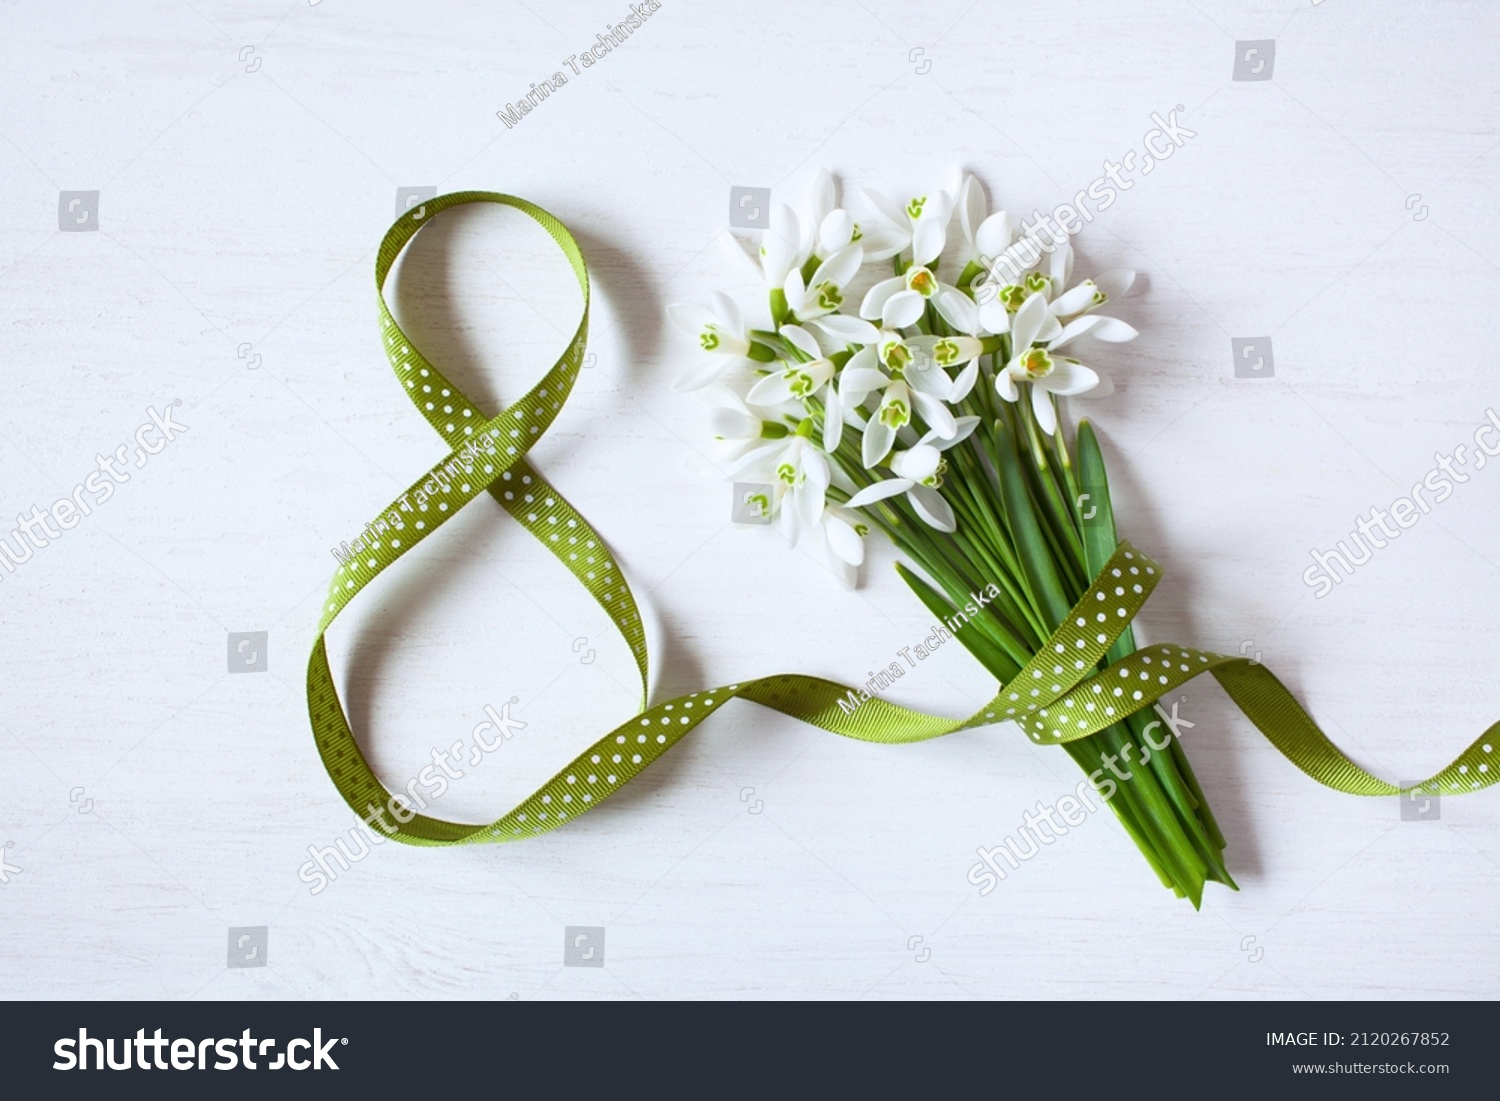 Geeting card for Women's day march 8, number eight from a green ribbon and a bouquet of snowdrops on a white wooden background #2120267852